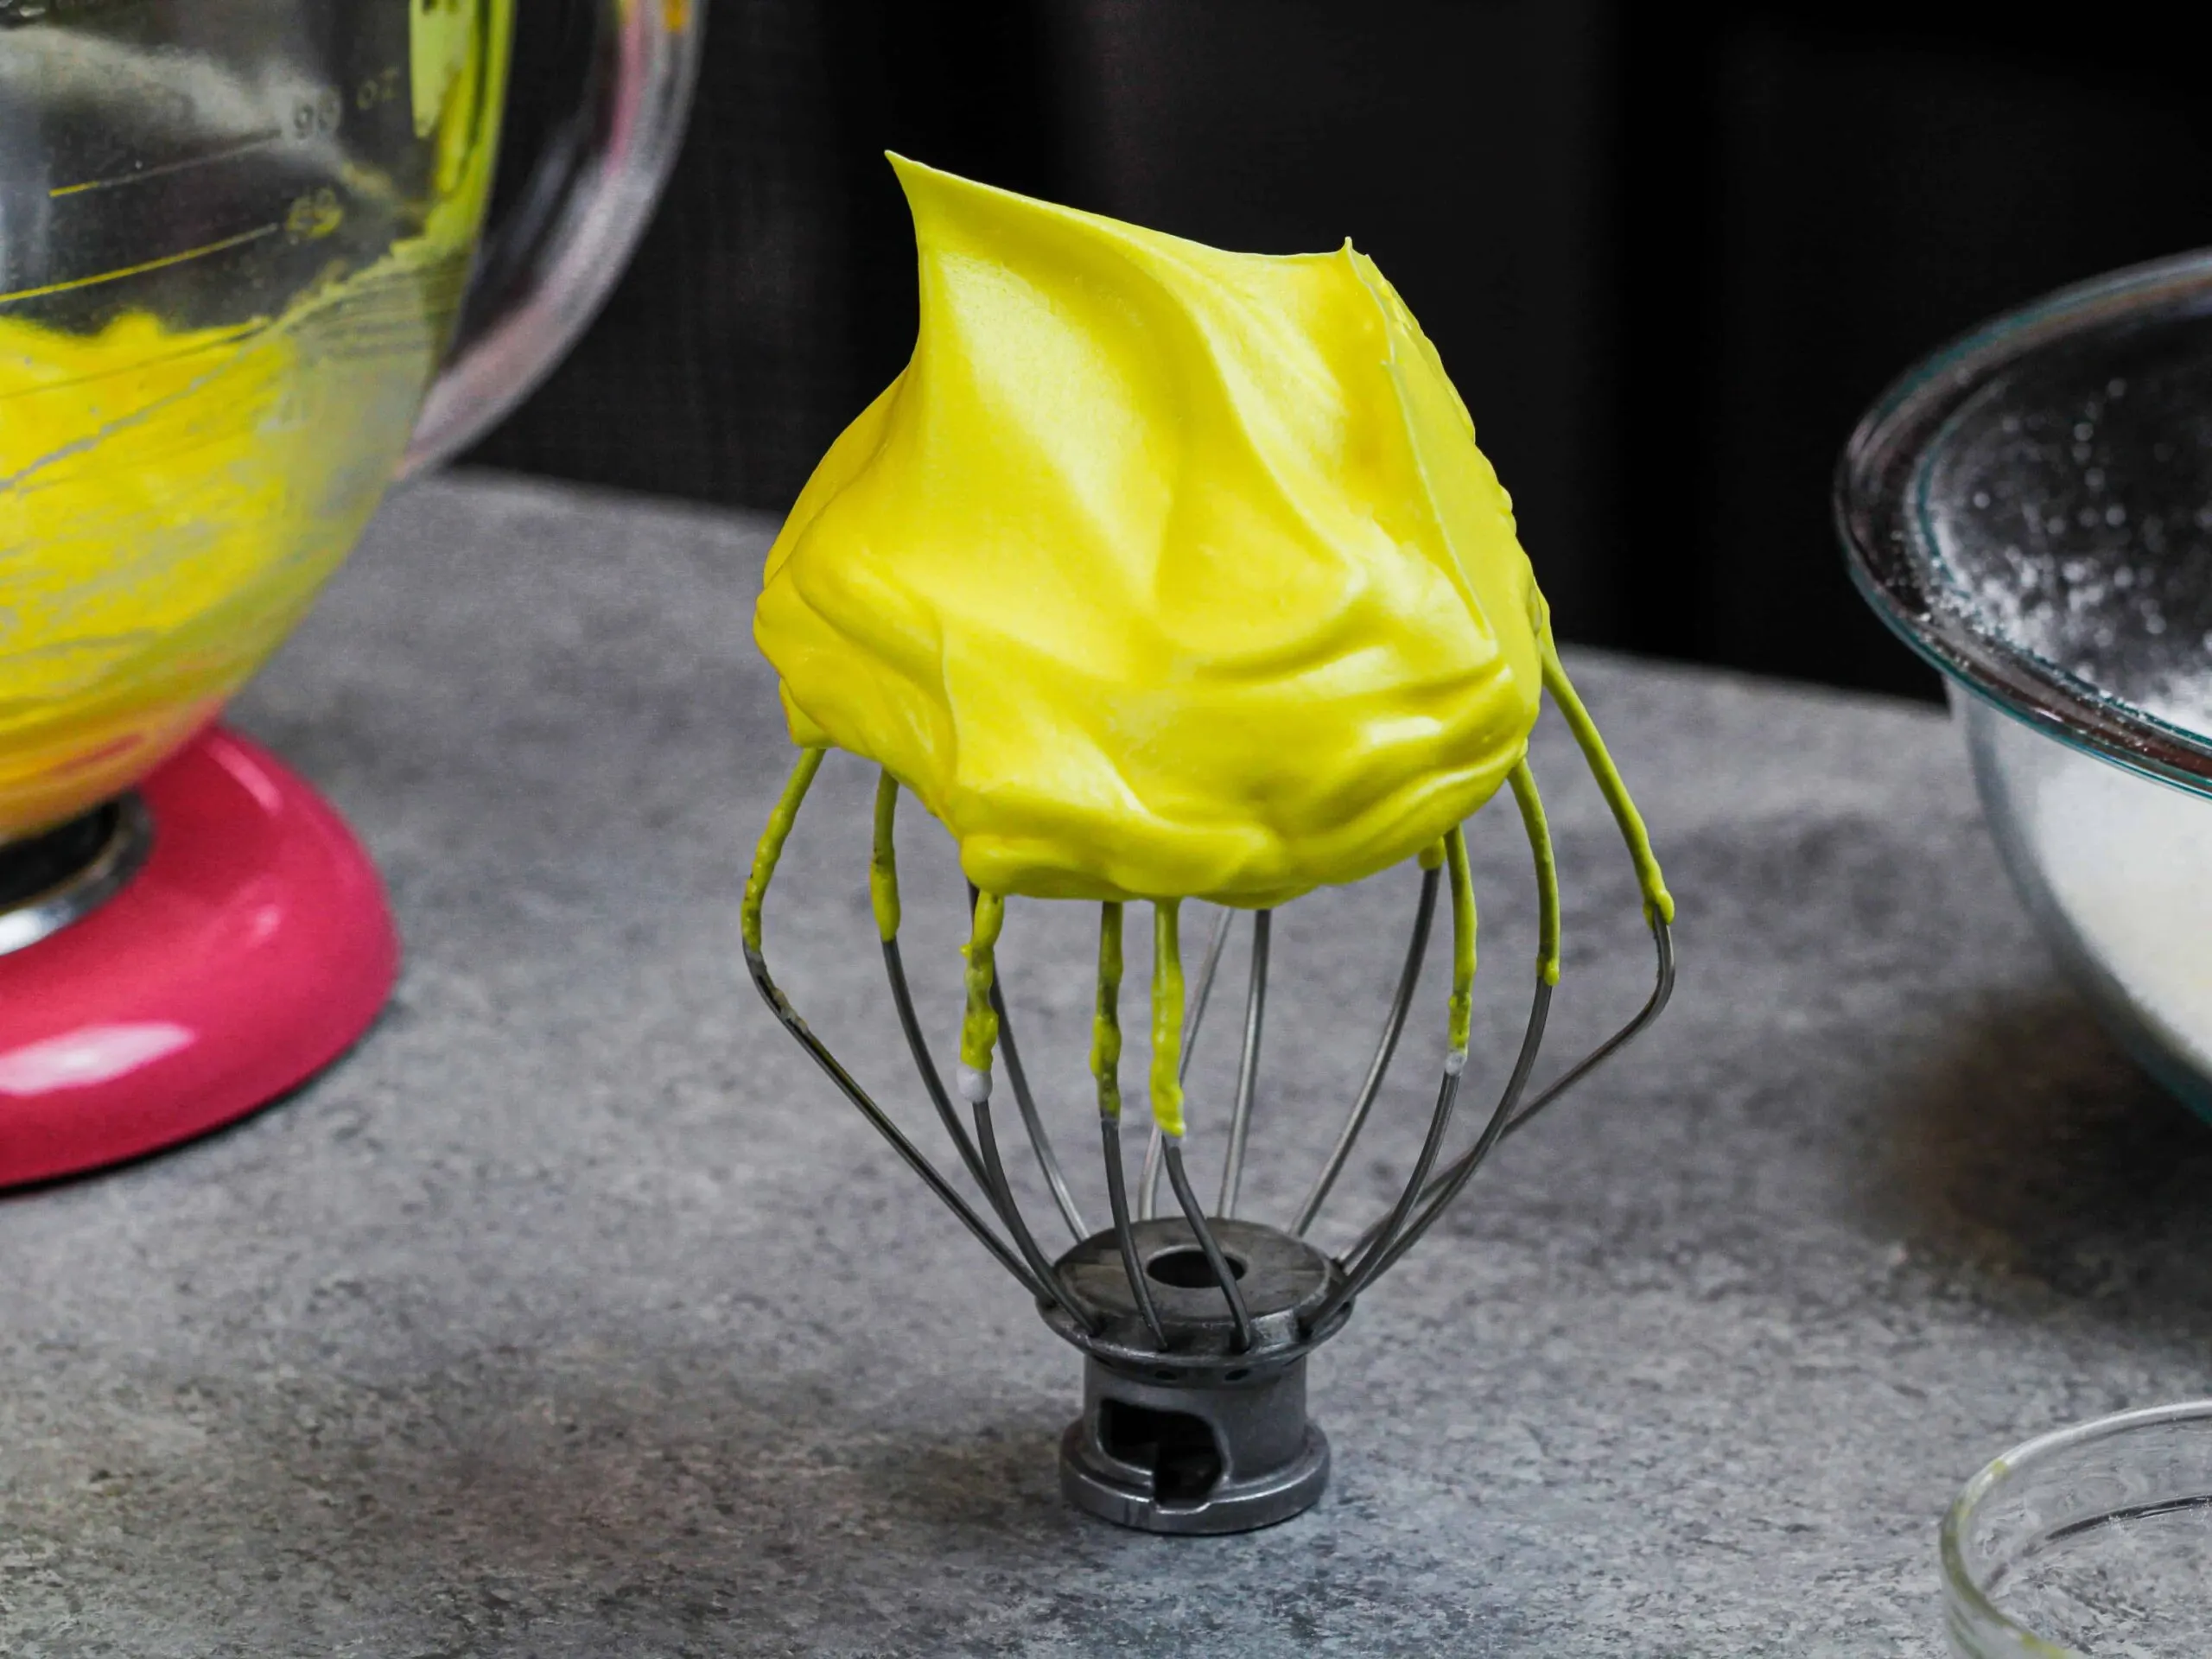 image of french meringue on a whisk that's been colored yellow with gel food coloring